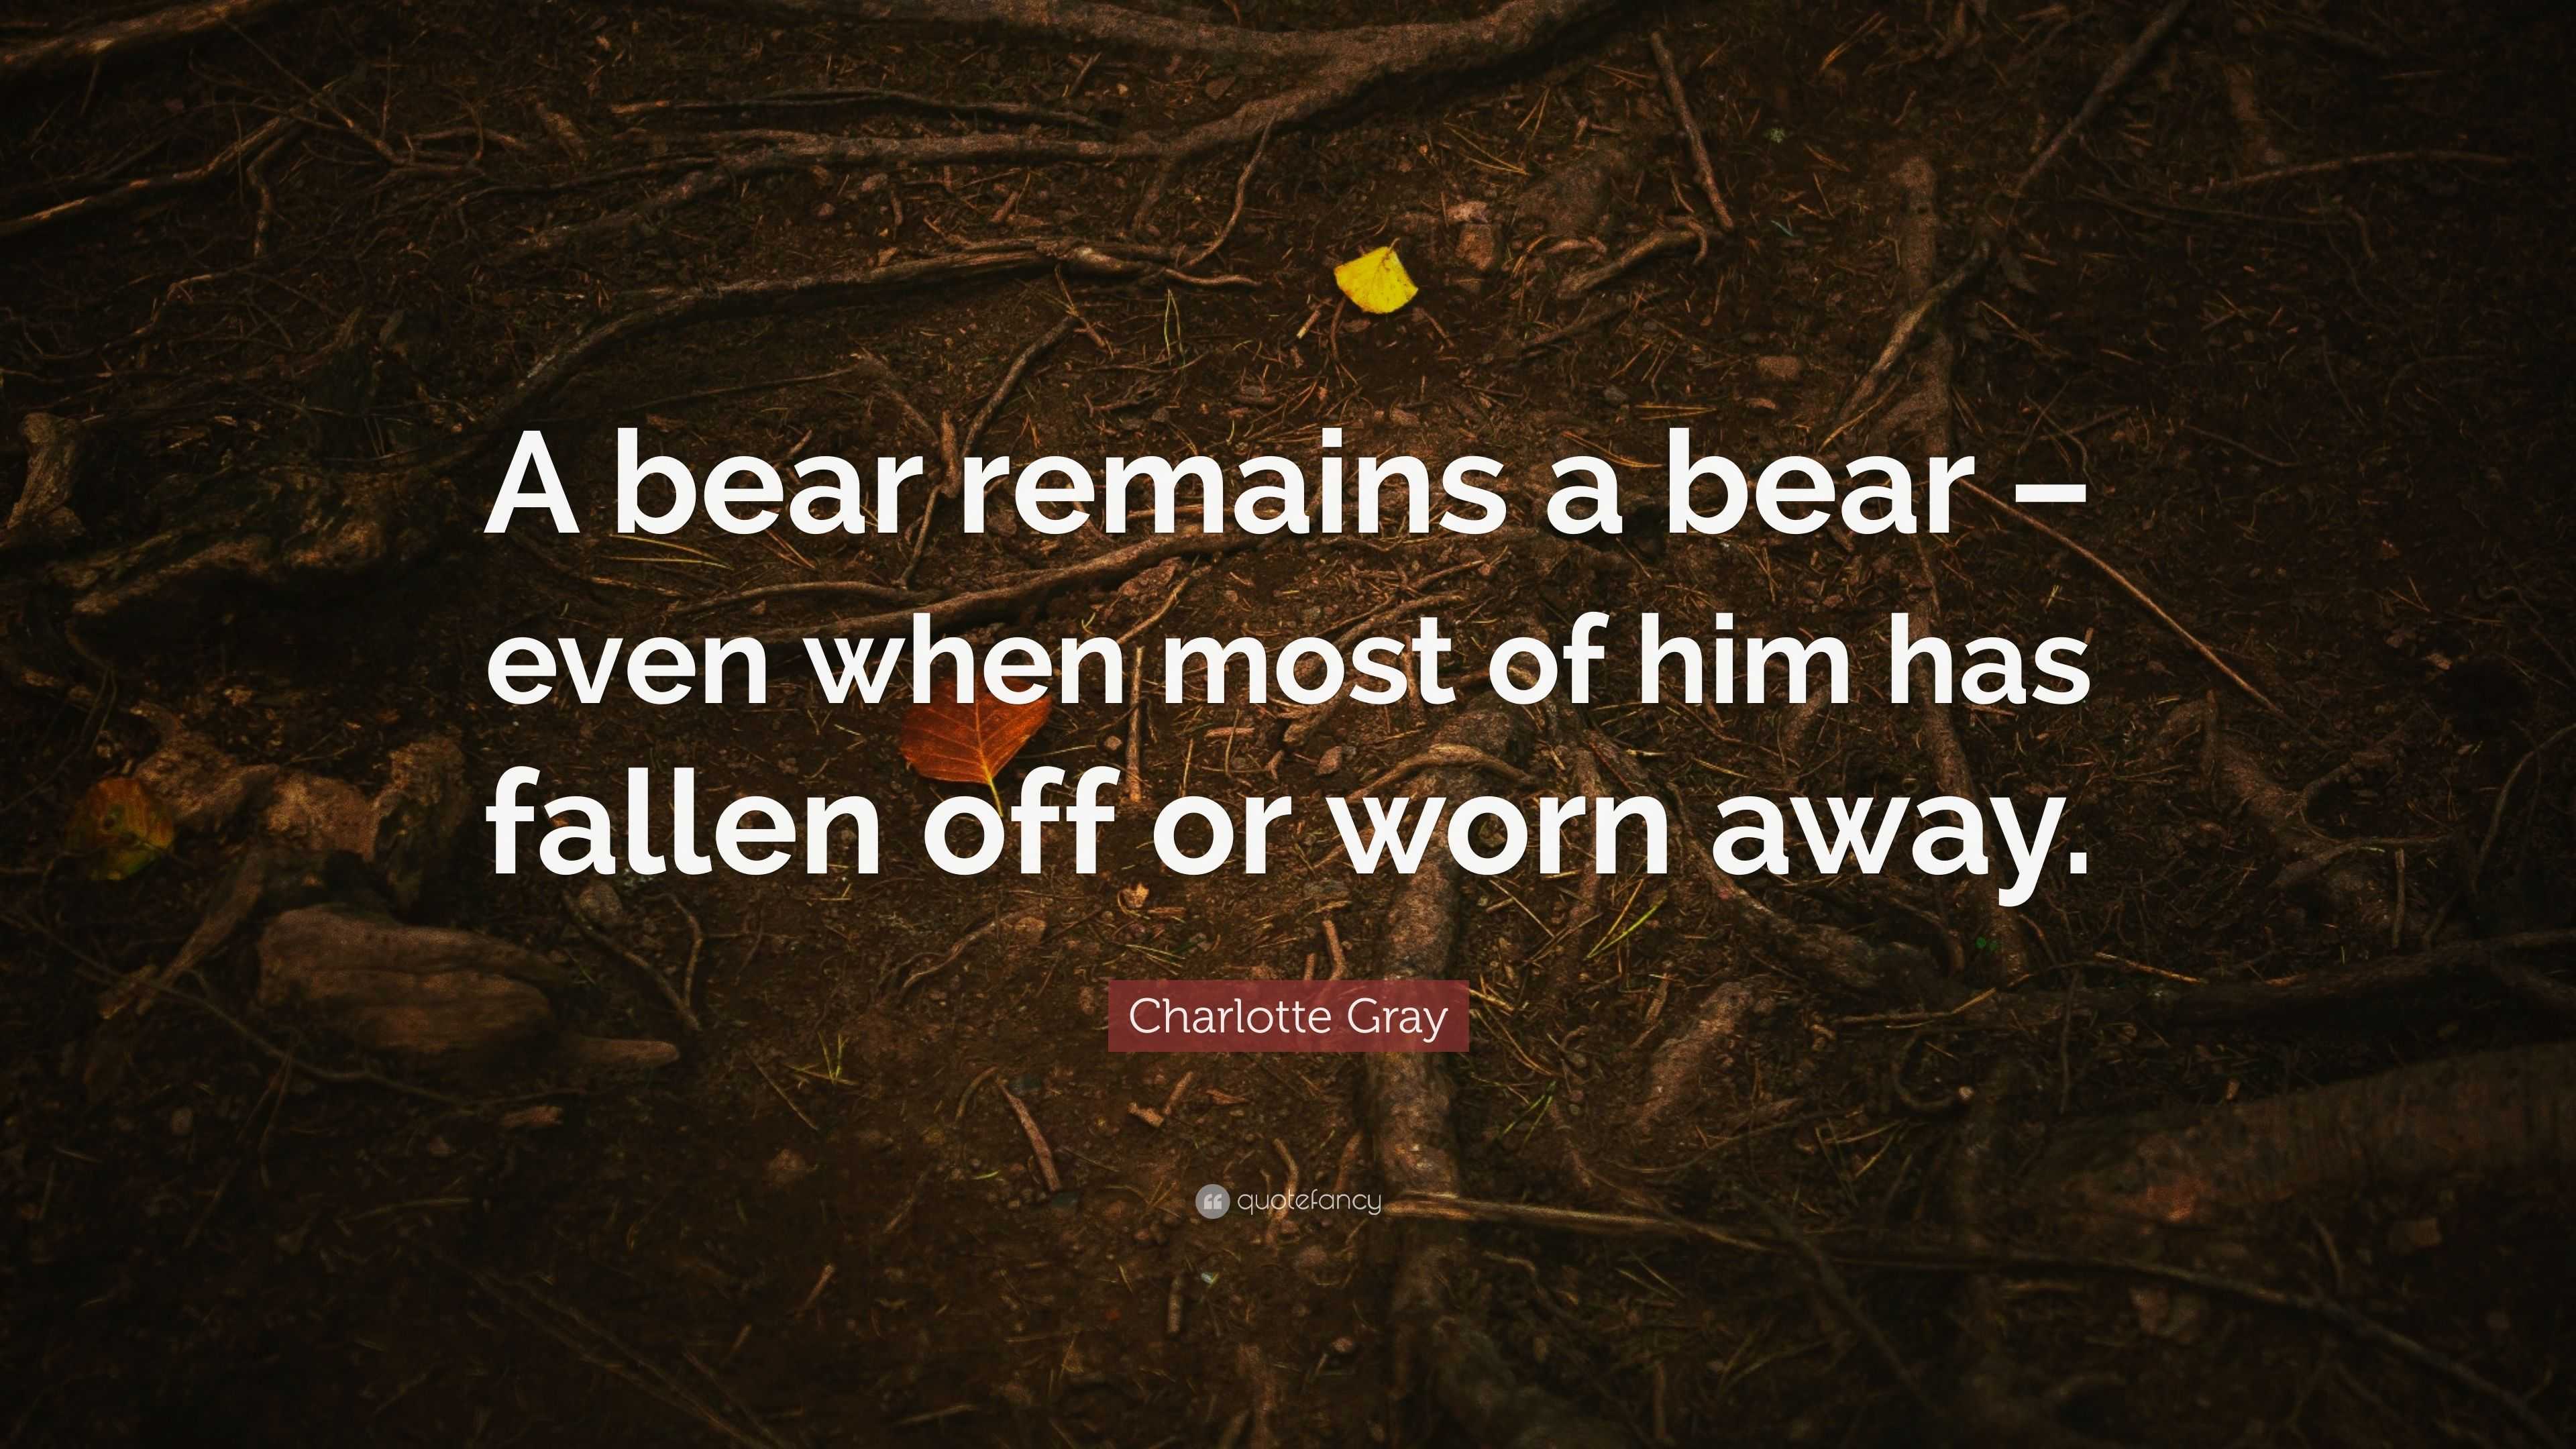 A bear remains a bear – even when most of him has fallen off or worn away.